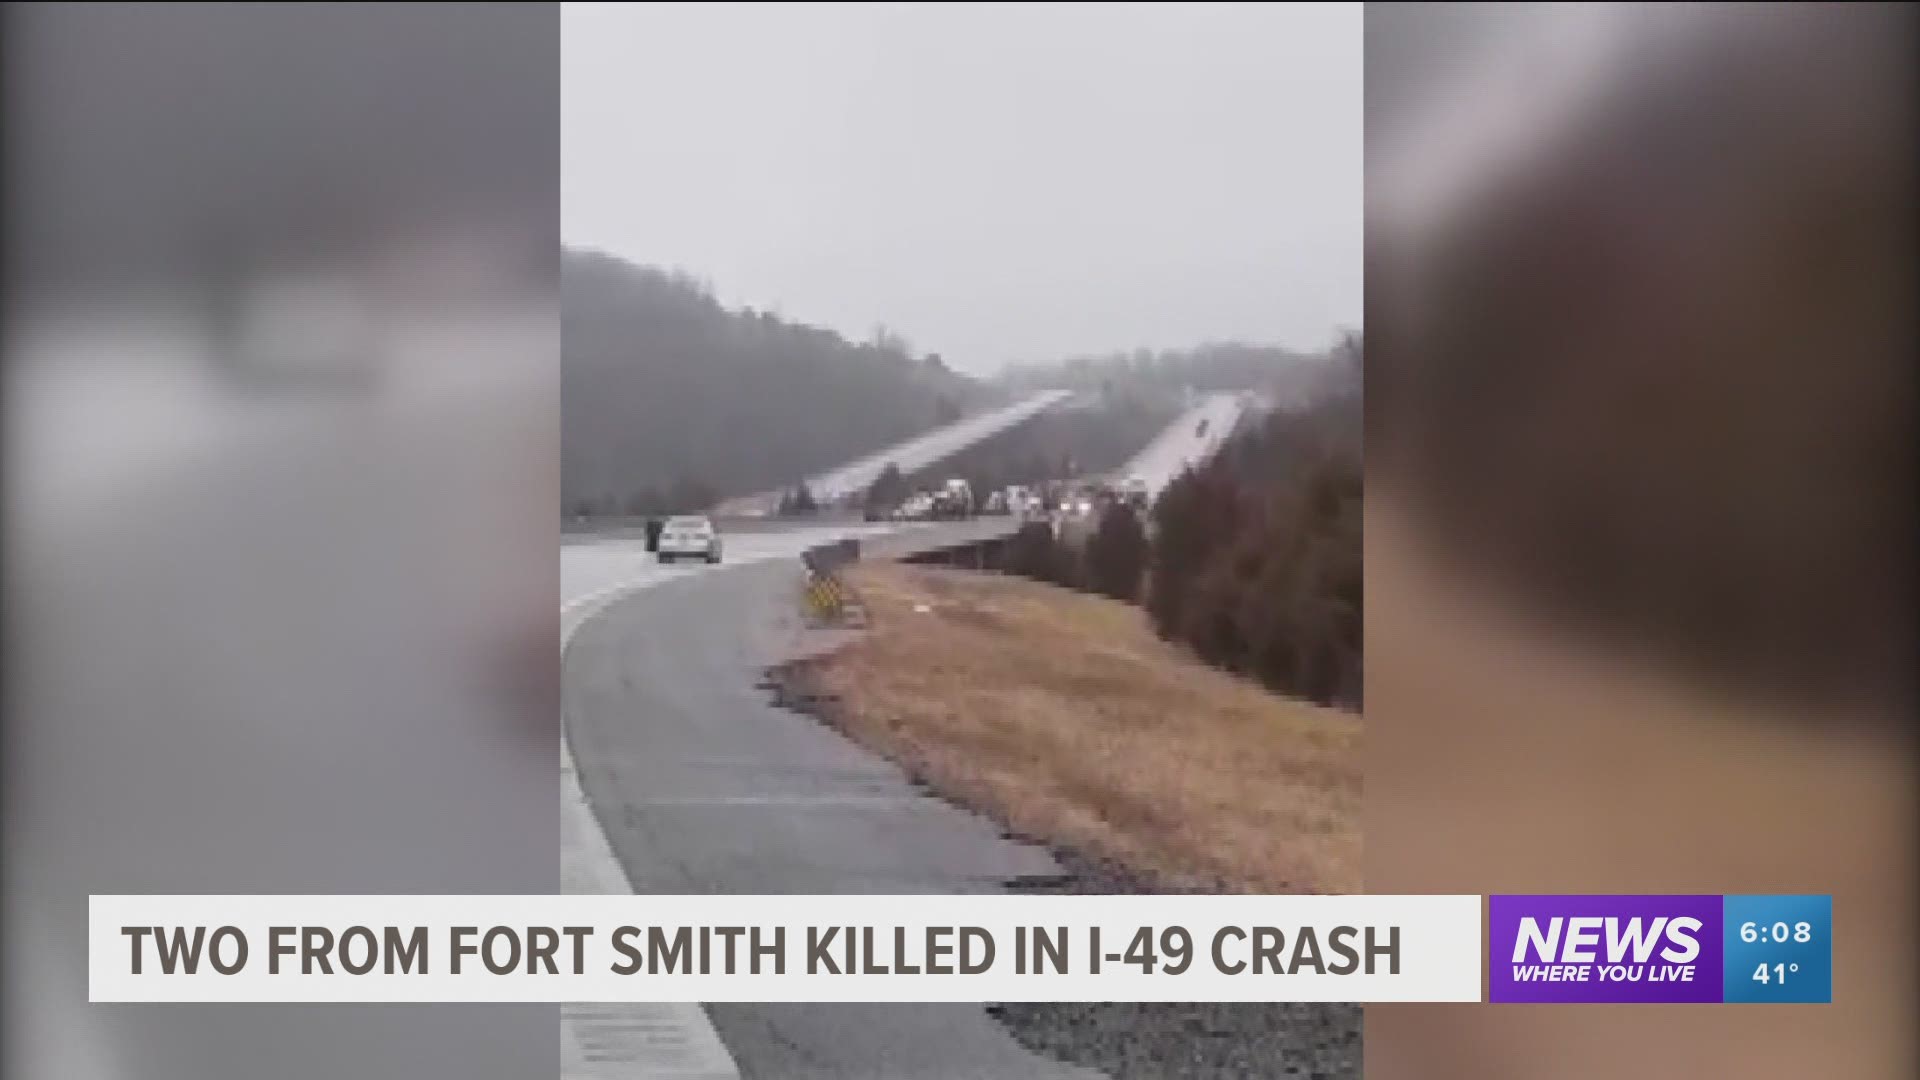 Two from Fort Smith killed in I-49 crash